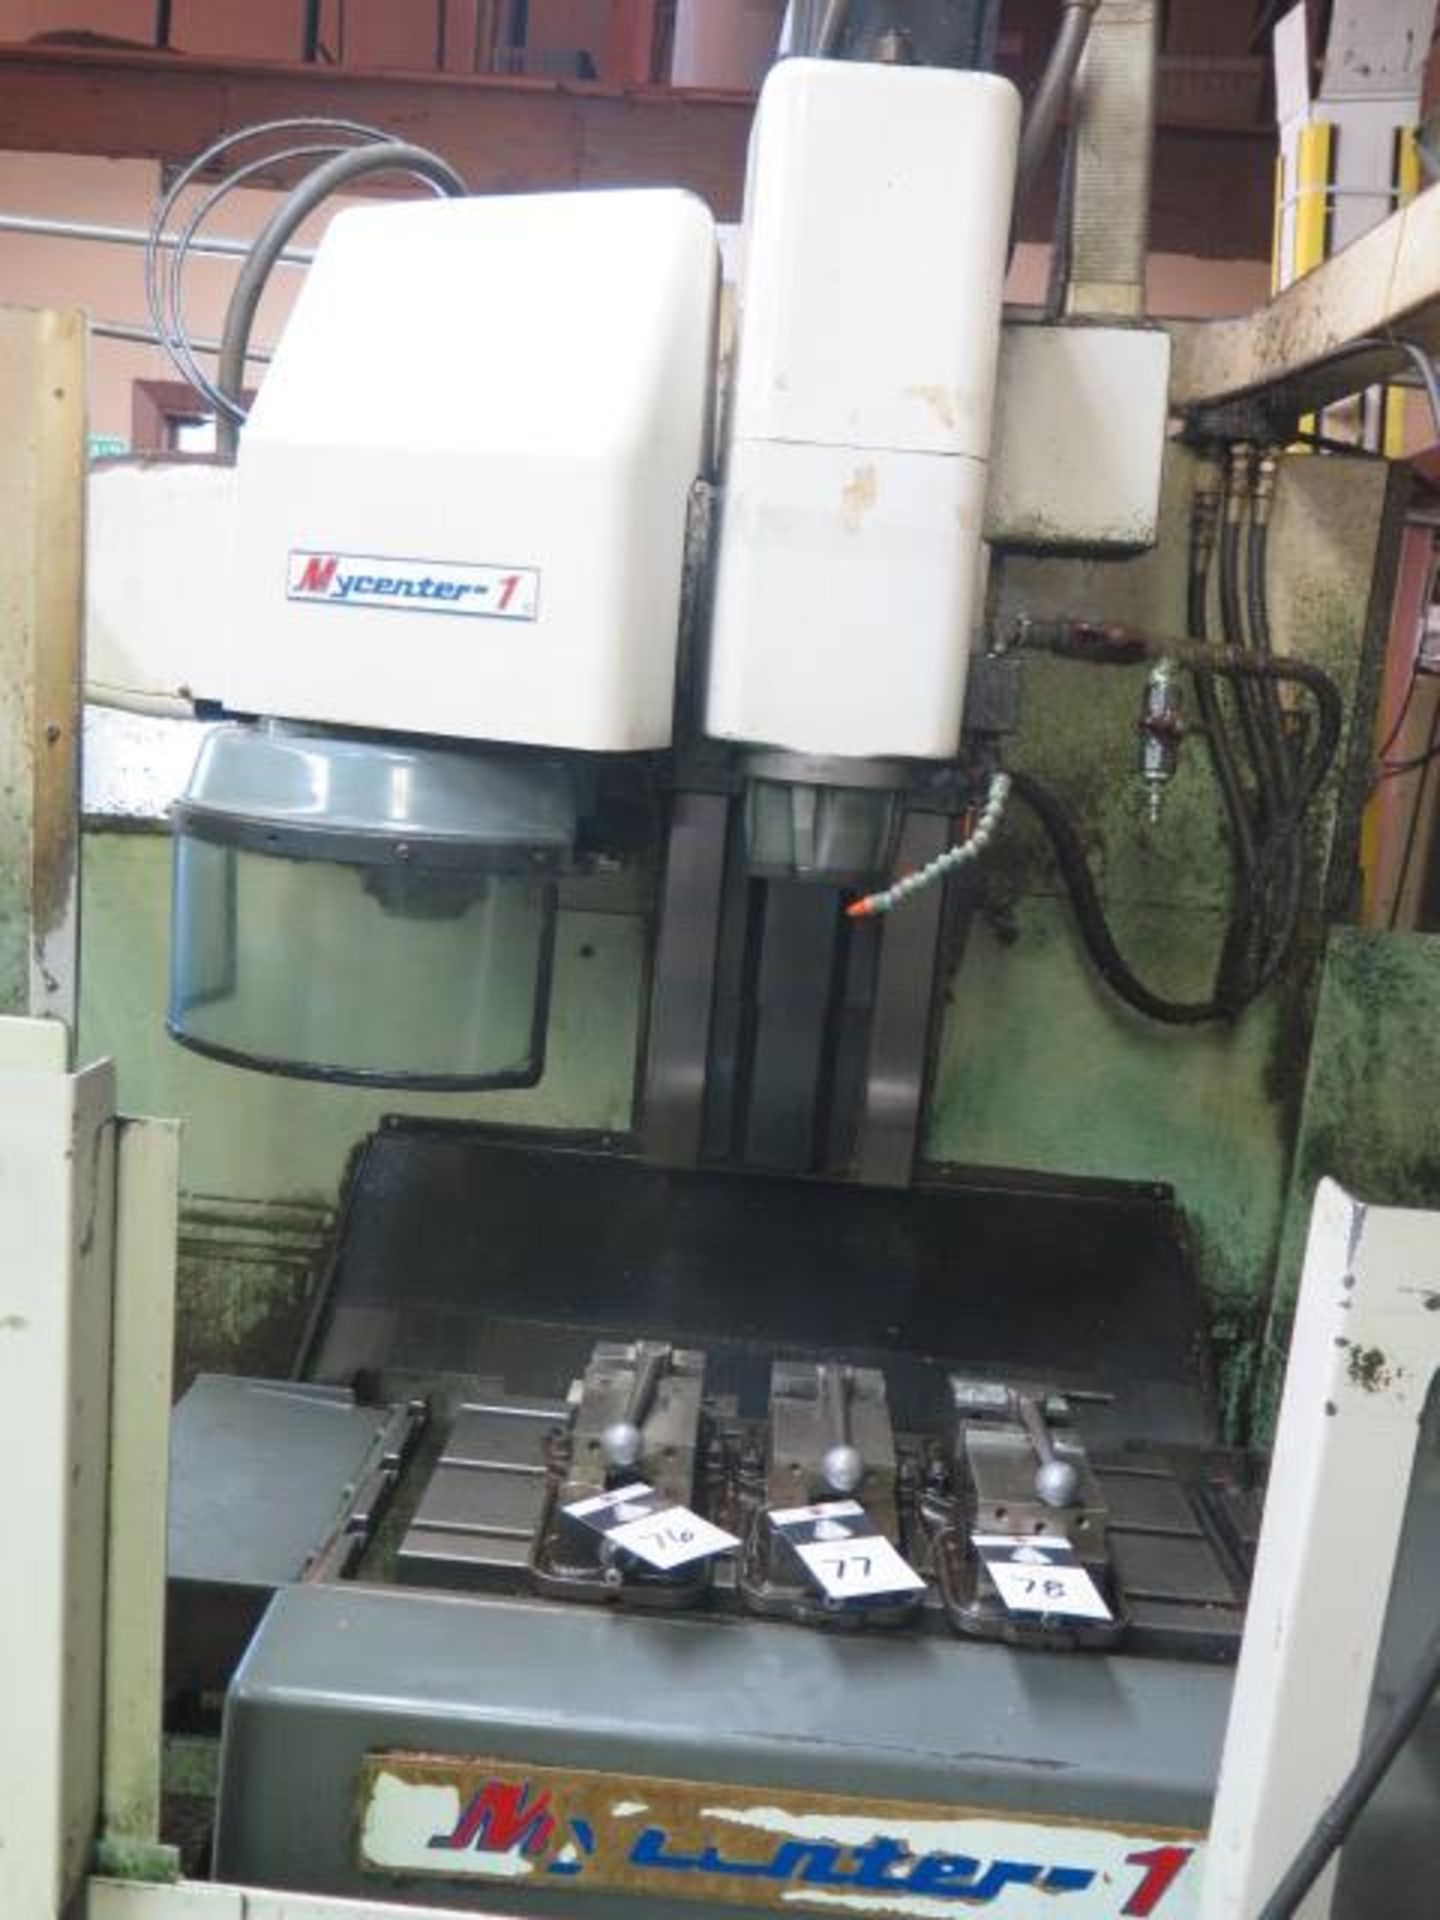 Kitamura Mycenter-1 CNC Vertical Machining Center s/n 01445 w/ Fanuc System 3M Controls, SOLD AS IS - Image 2 of 11